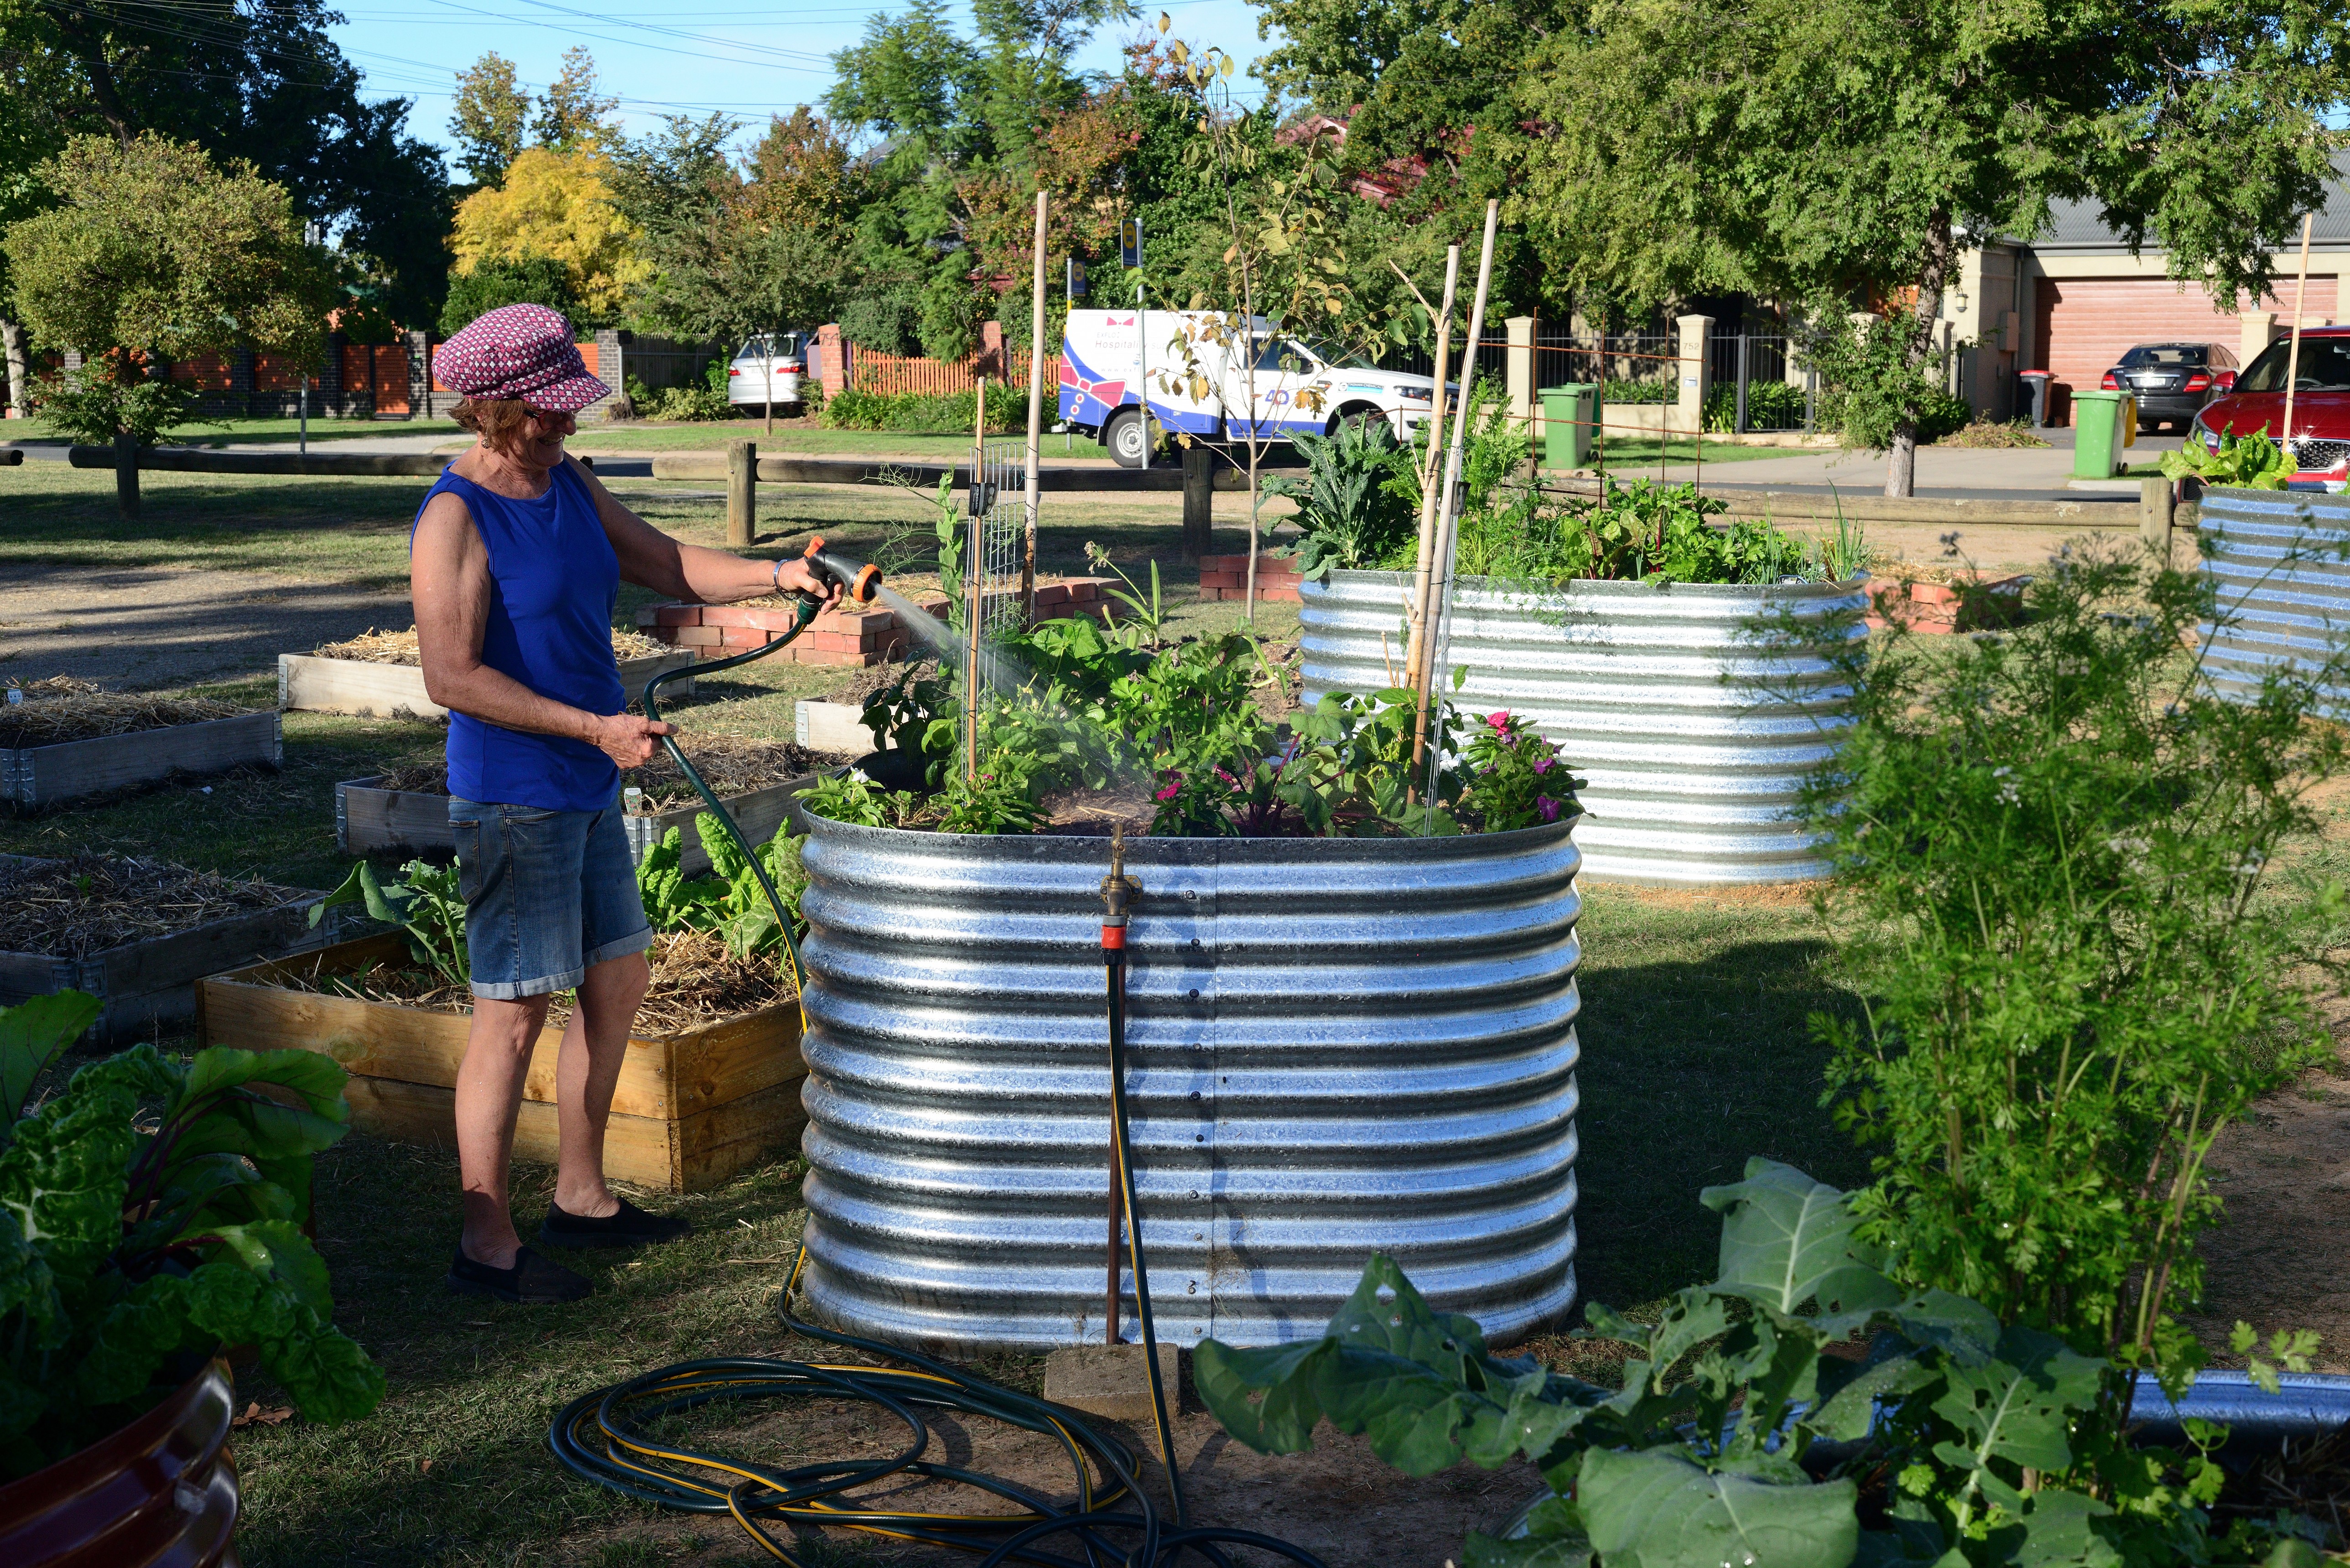 A woman watering a raised corrugated iron garden bed with a hose.